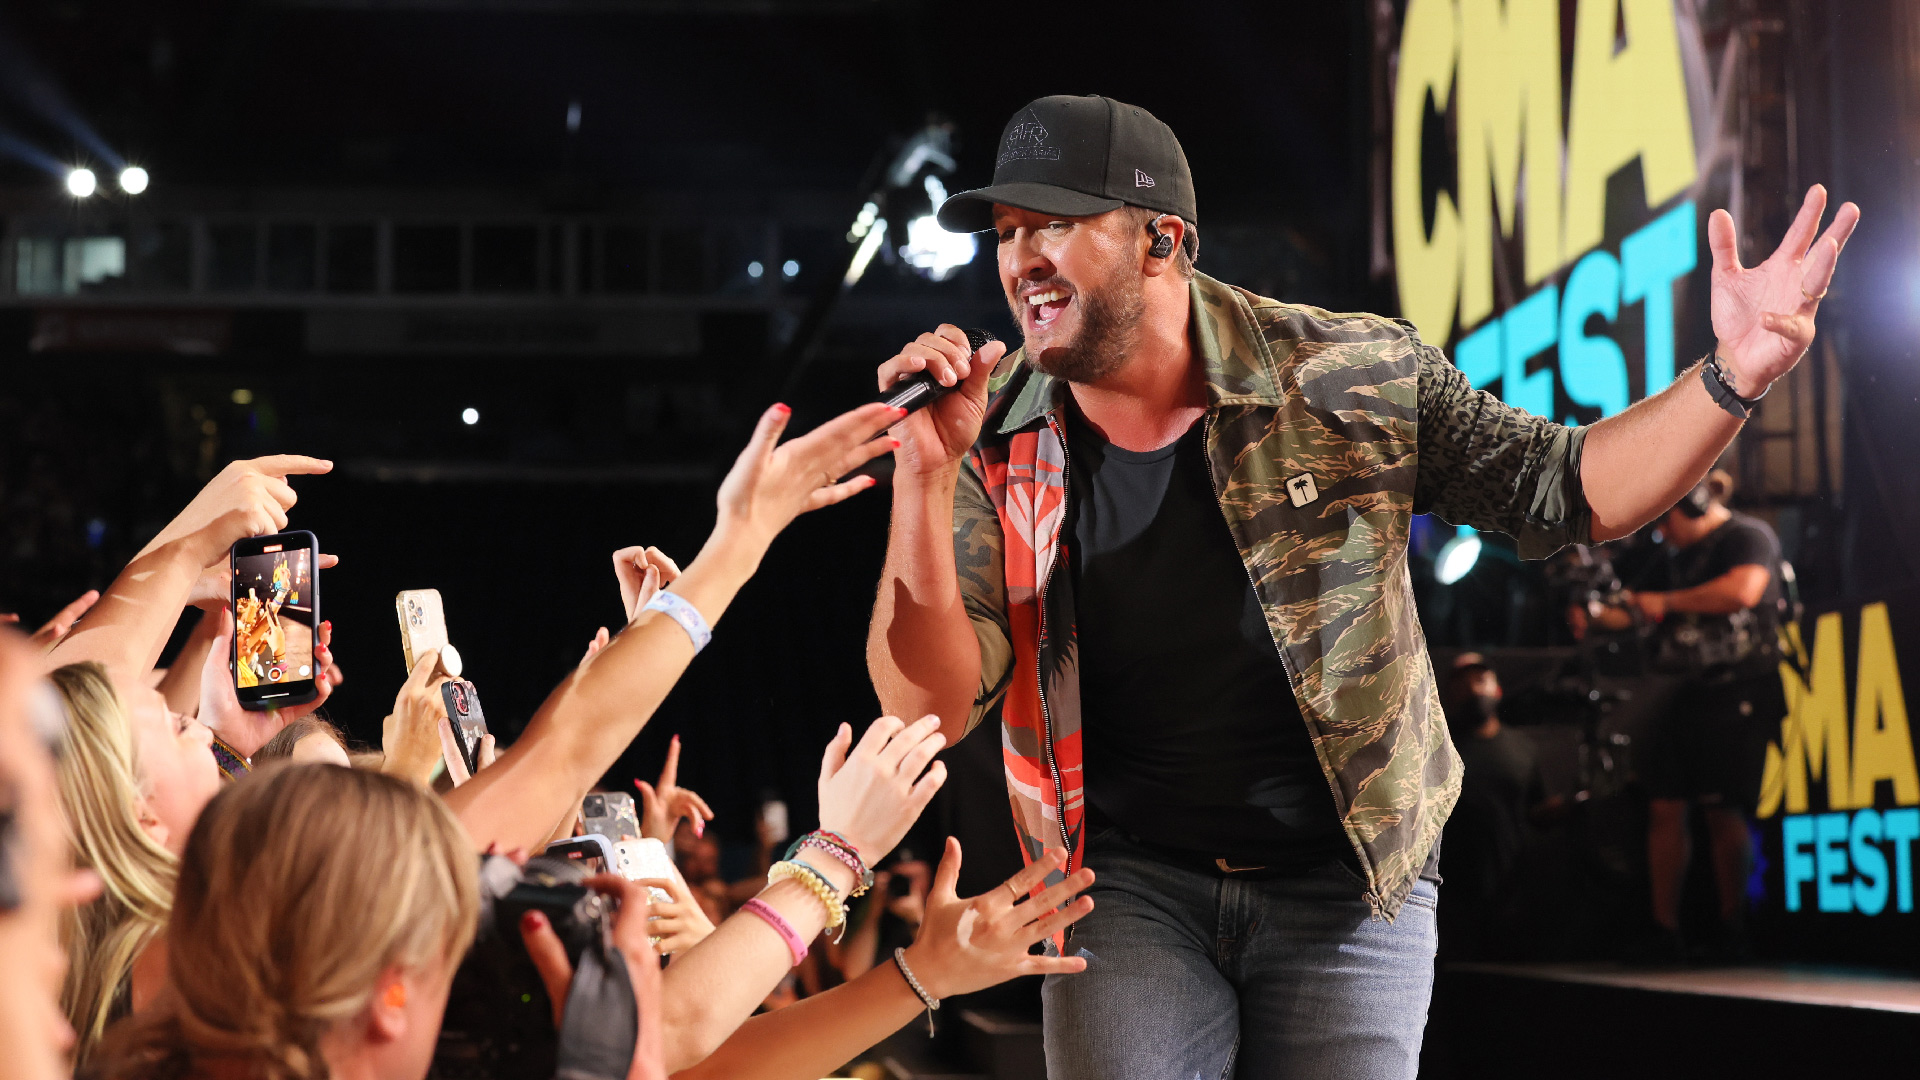 Luke Bryan performs during day 3 of CMA Fest 2022 at Nissan Stadium on June 11, 2022 in Nashville, Tennessee.